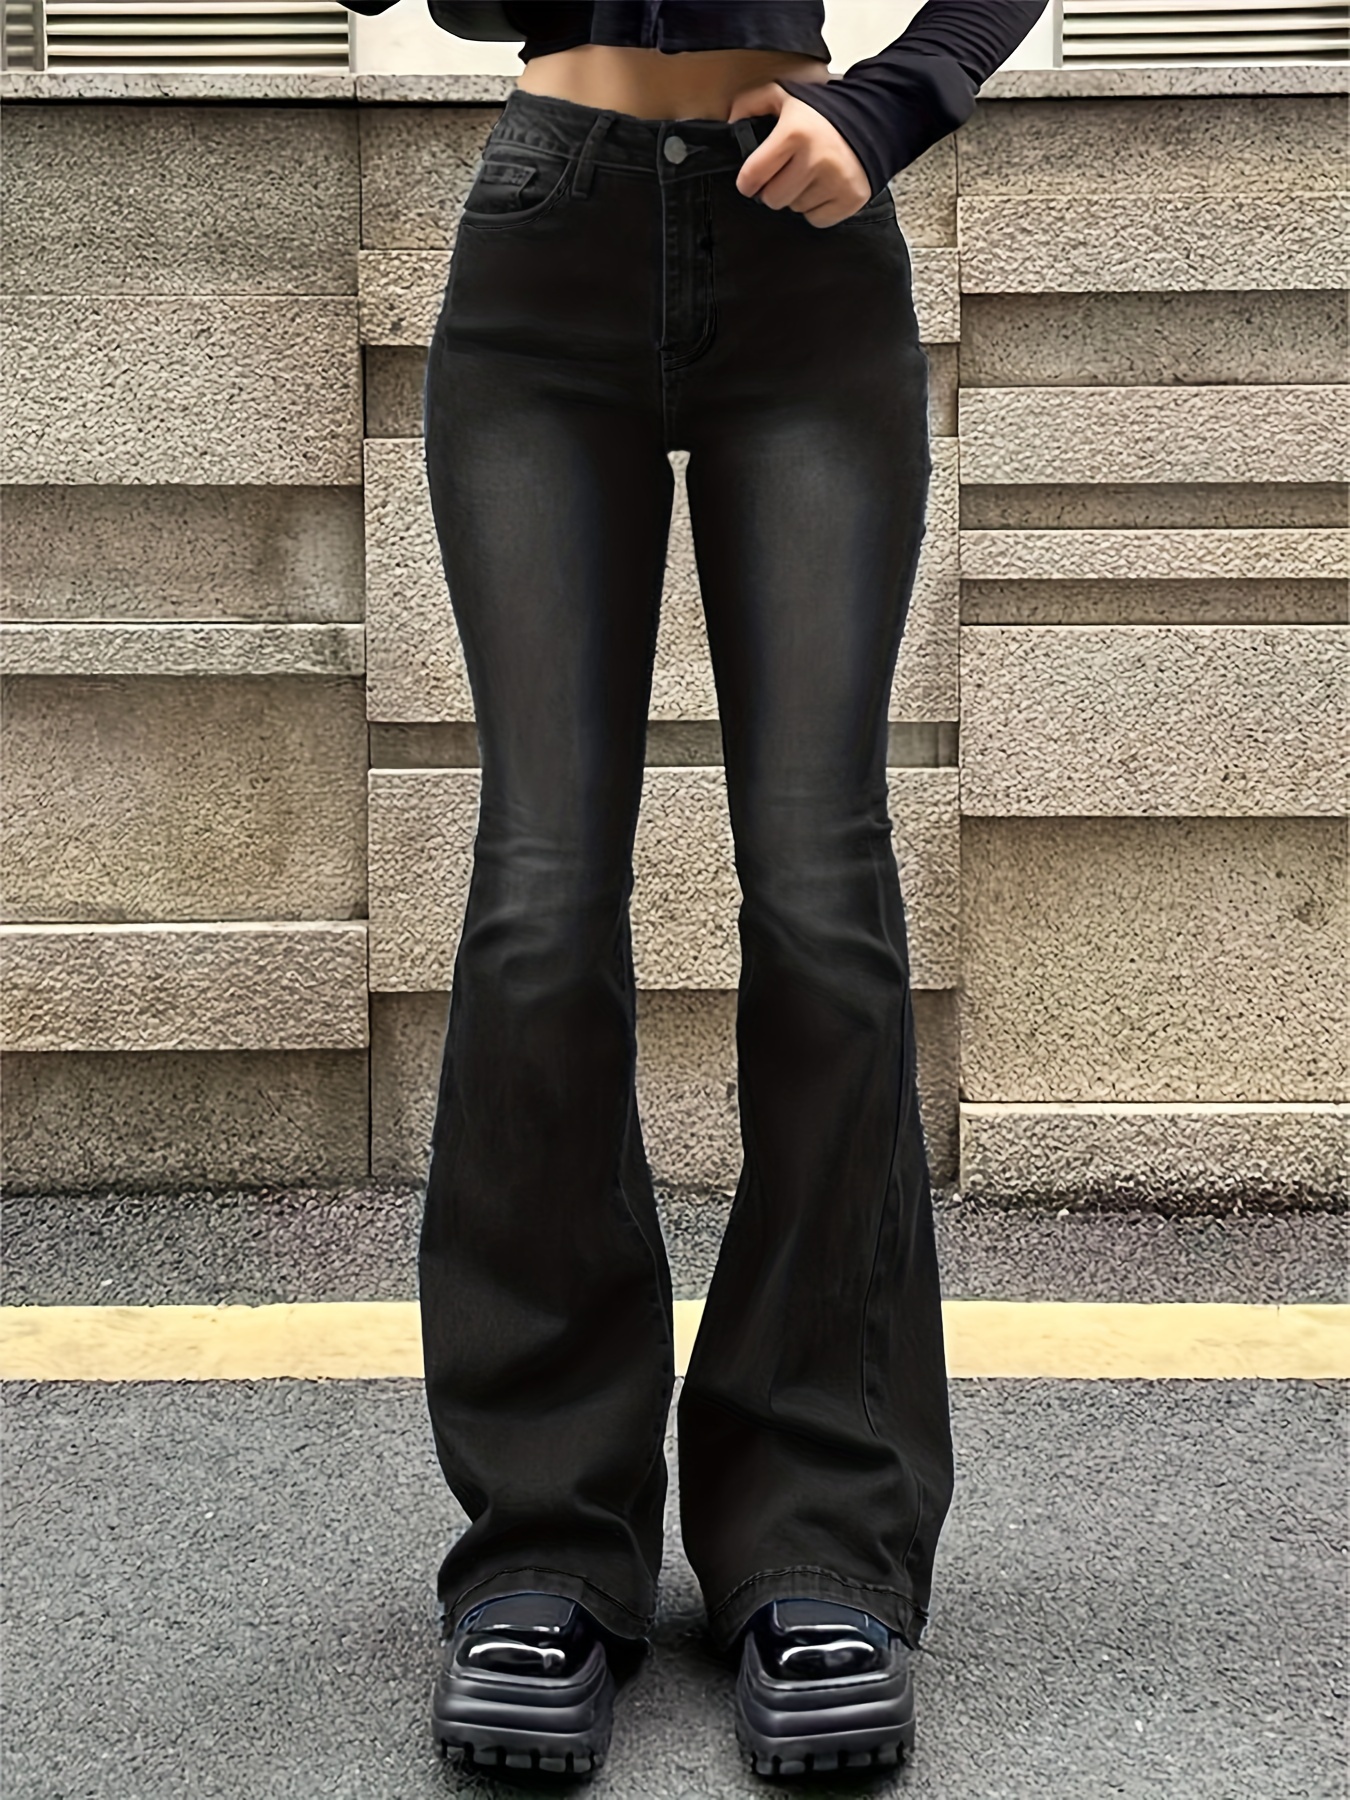 HIGH WAISTED STRETCHY BELL BOTTOM BLACK JEANS - LOVER BRAND FASHION